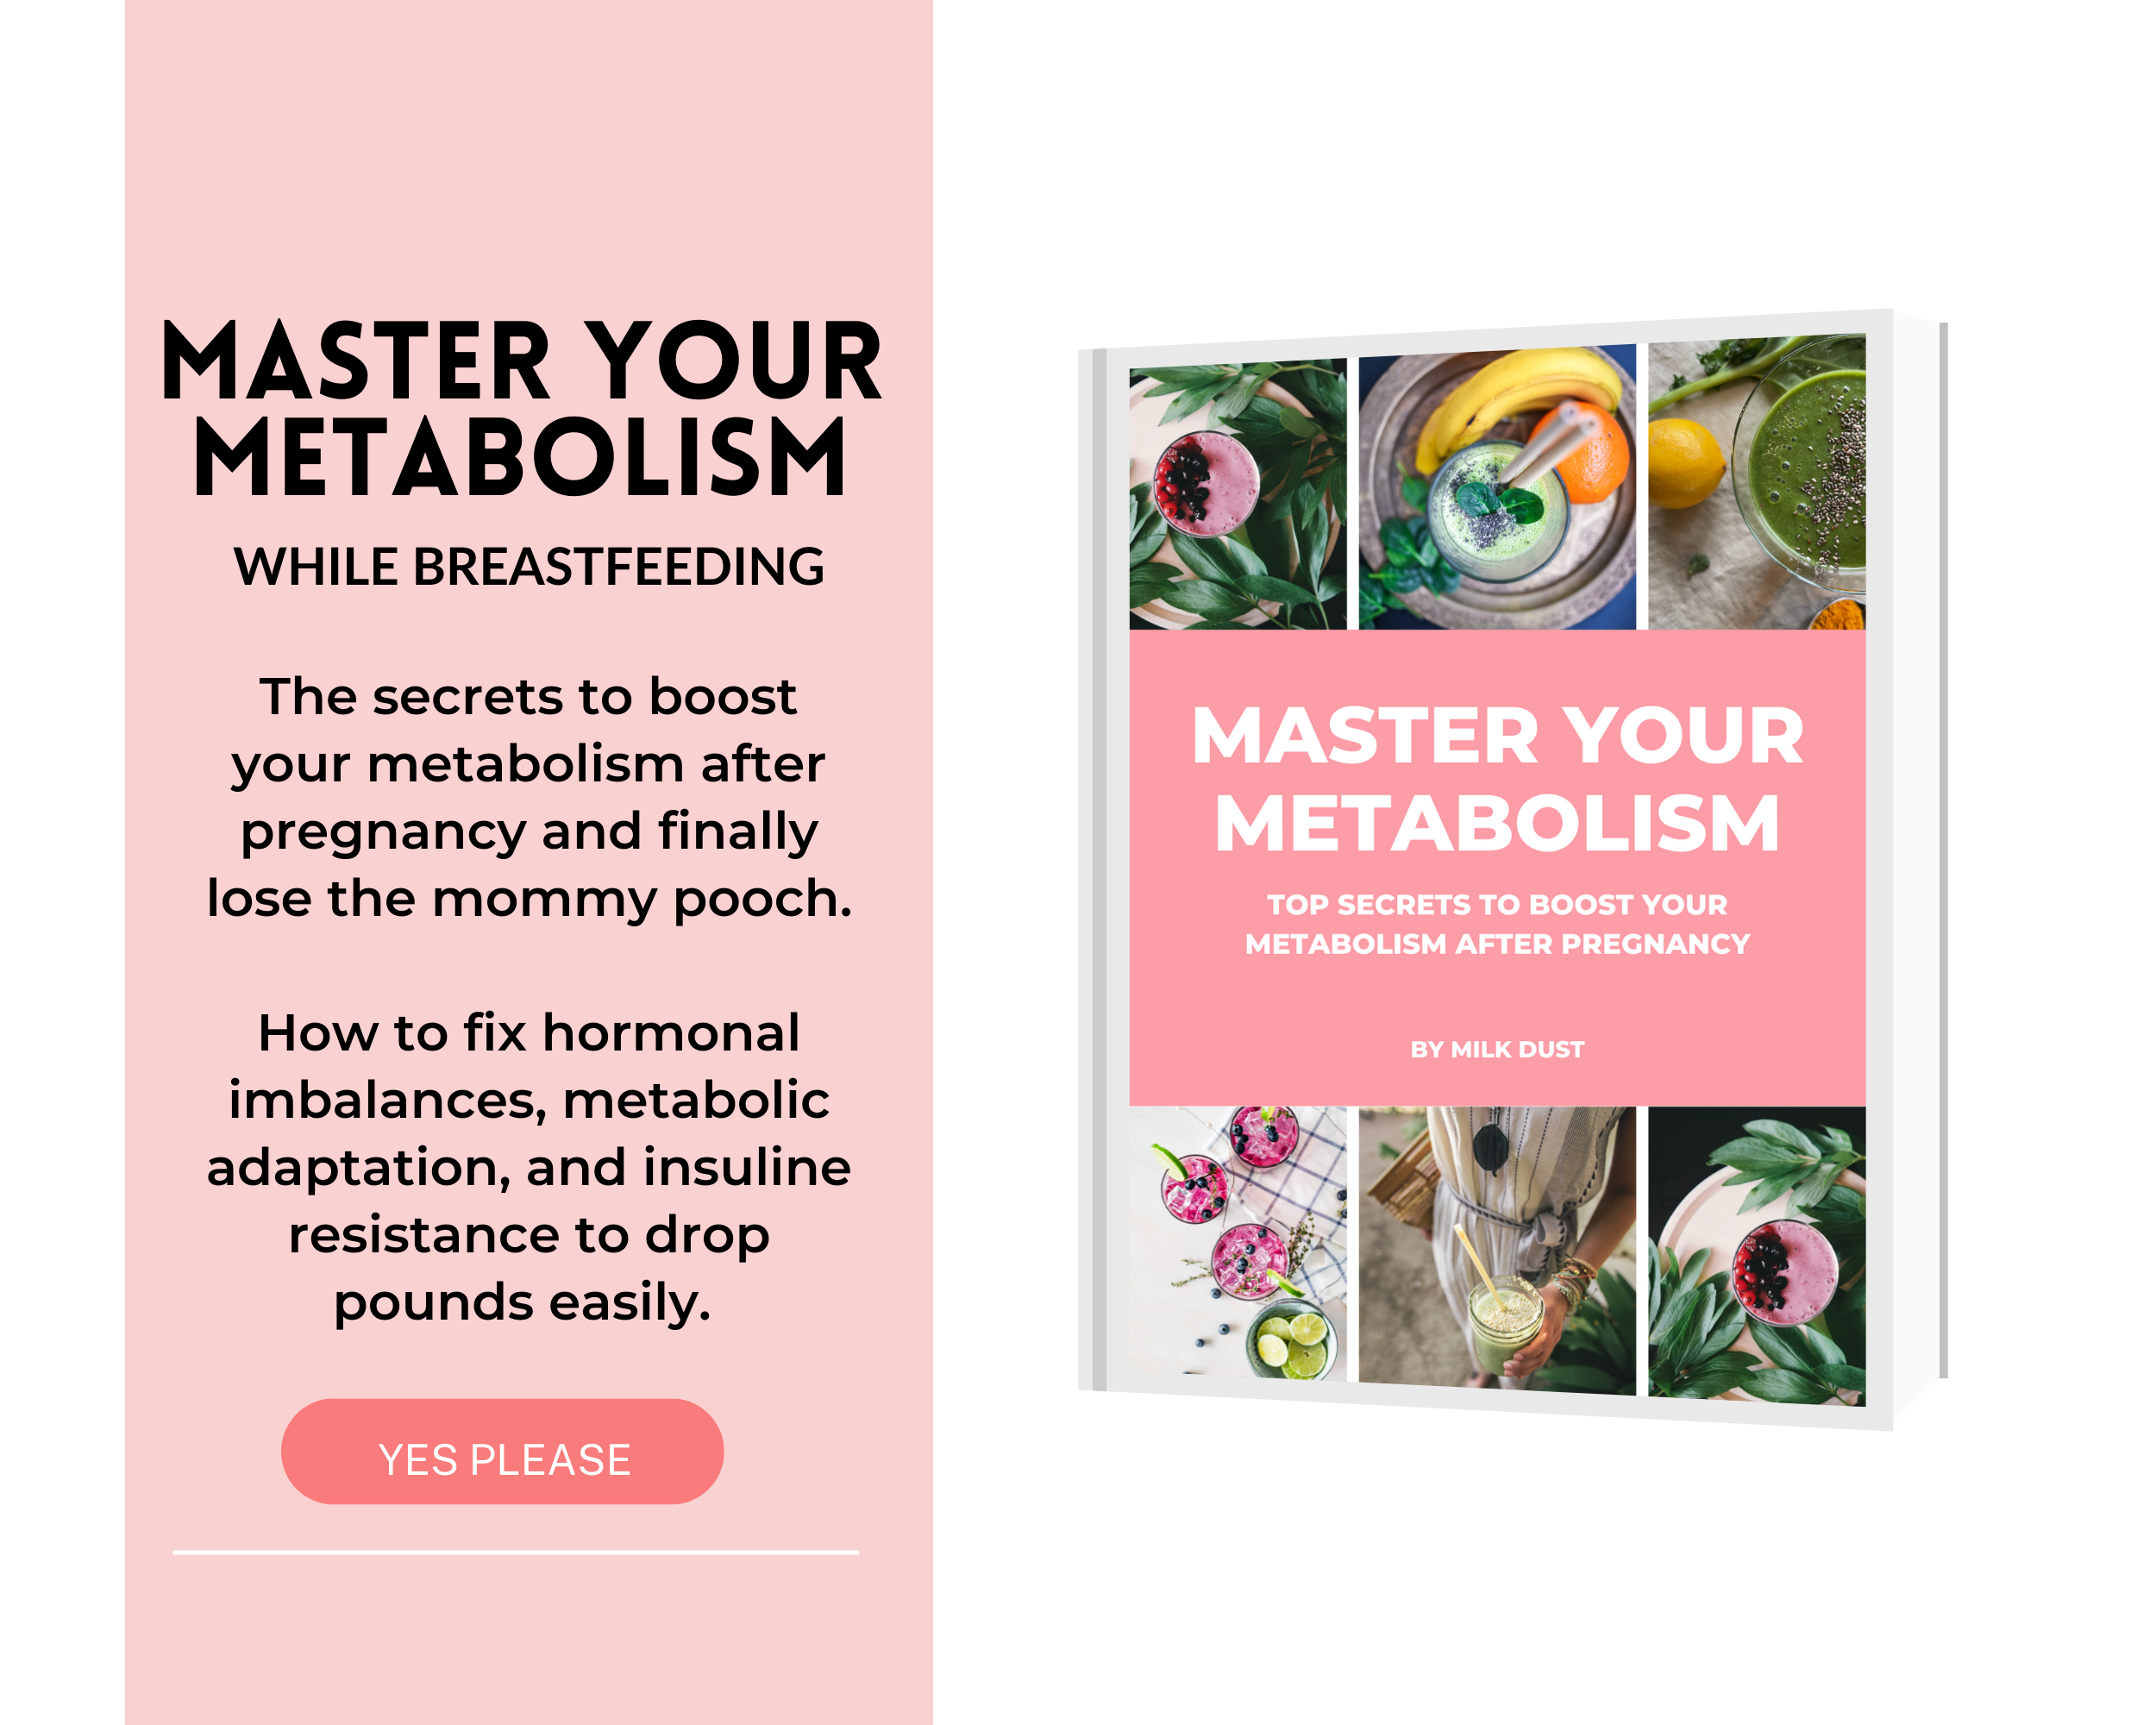 Let's speed up your metabolism ⚡ - Milk Dust